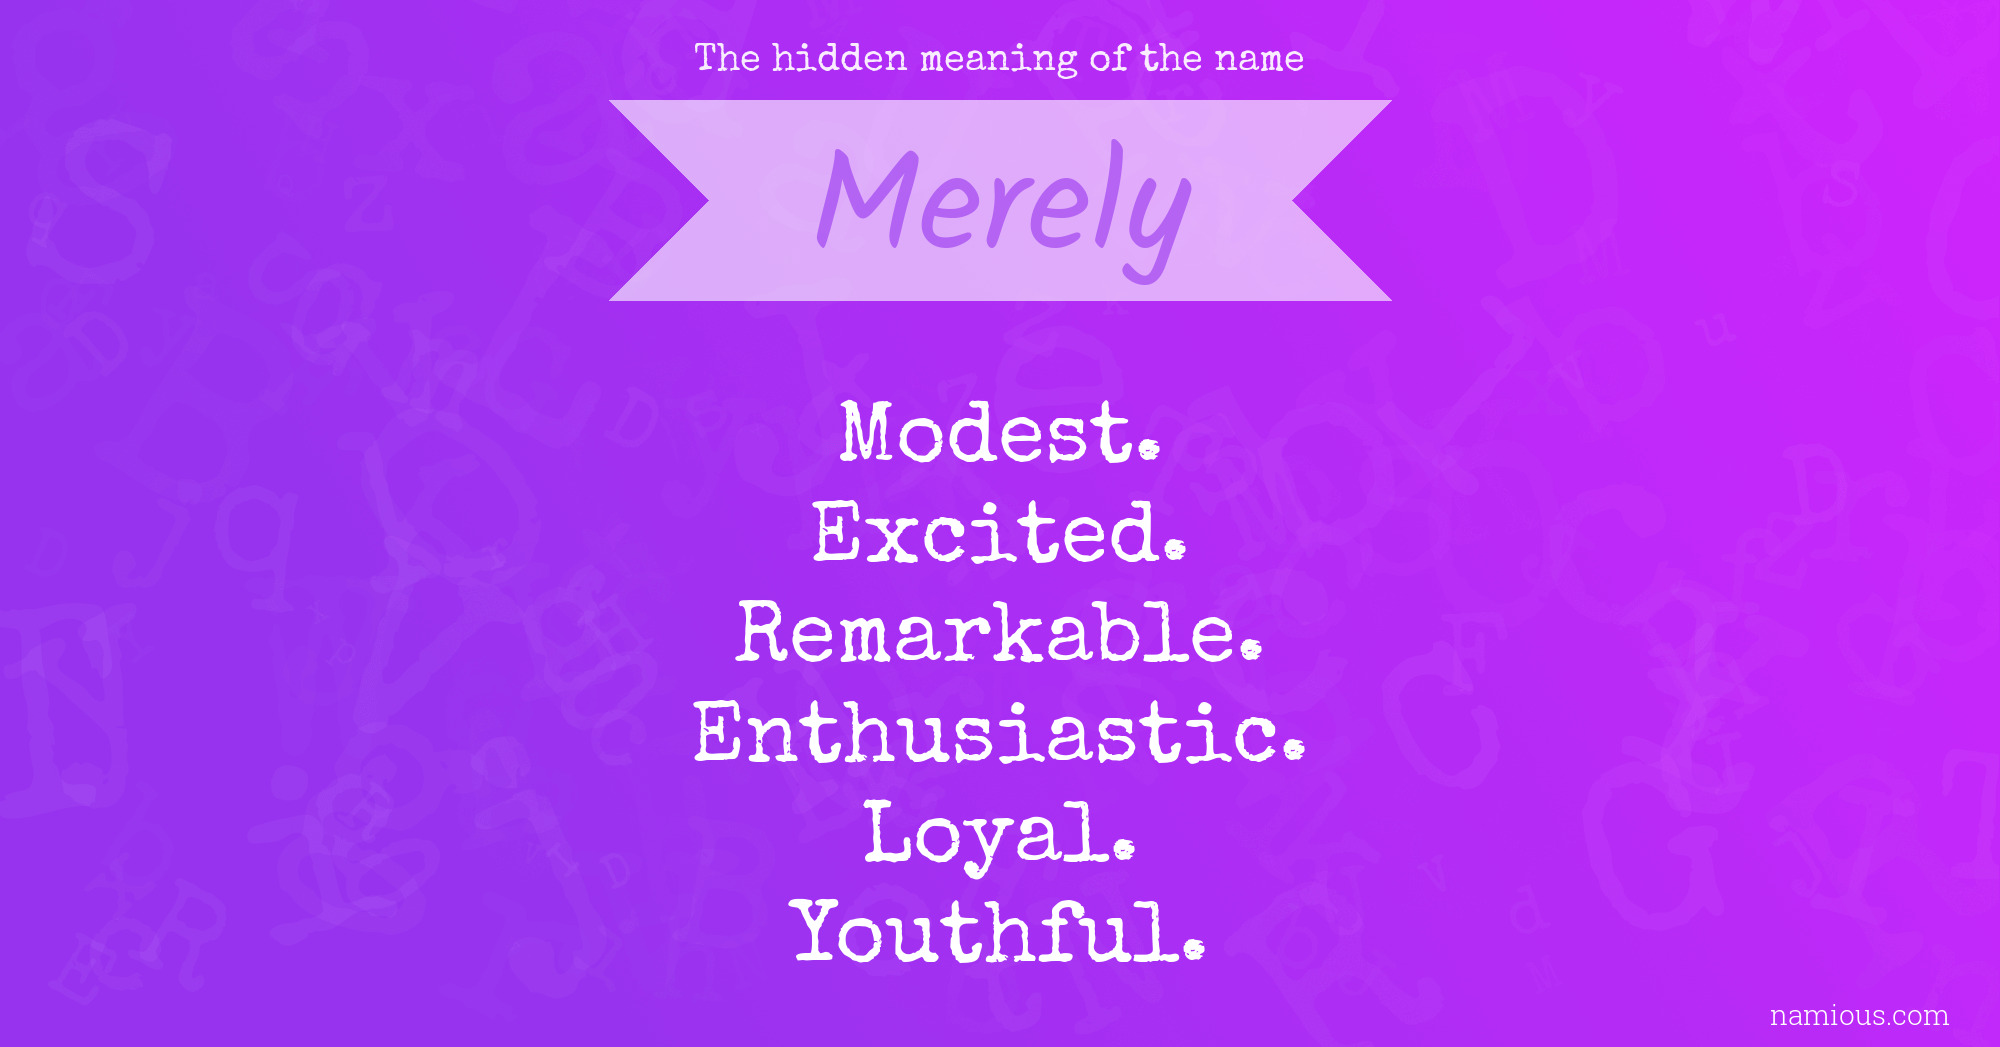 The hidden meaning of the name Merely